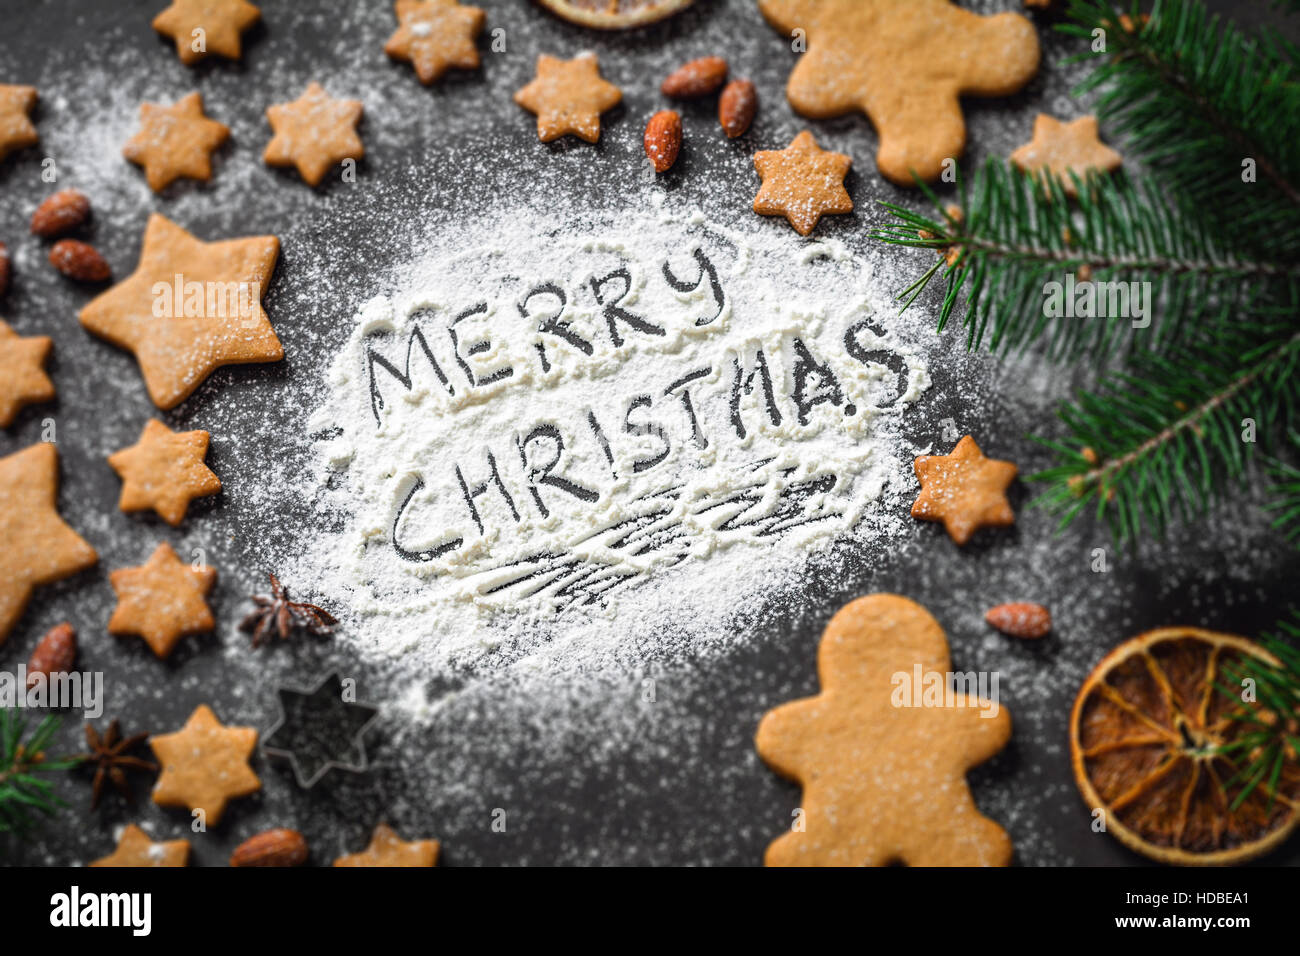 Merry Christmas greeting written on flour. Christmas holidays card with gingerbread cookies, spices, fir tree. Selective focus Stock Photo